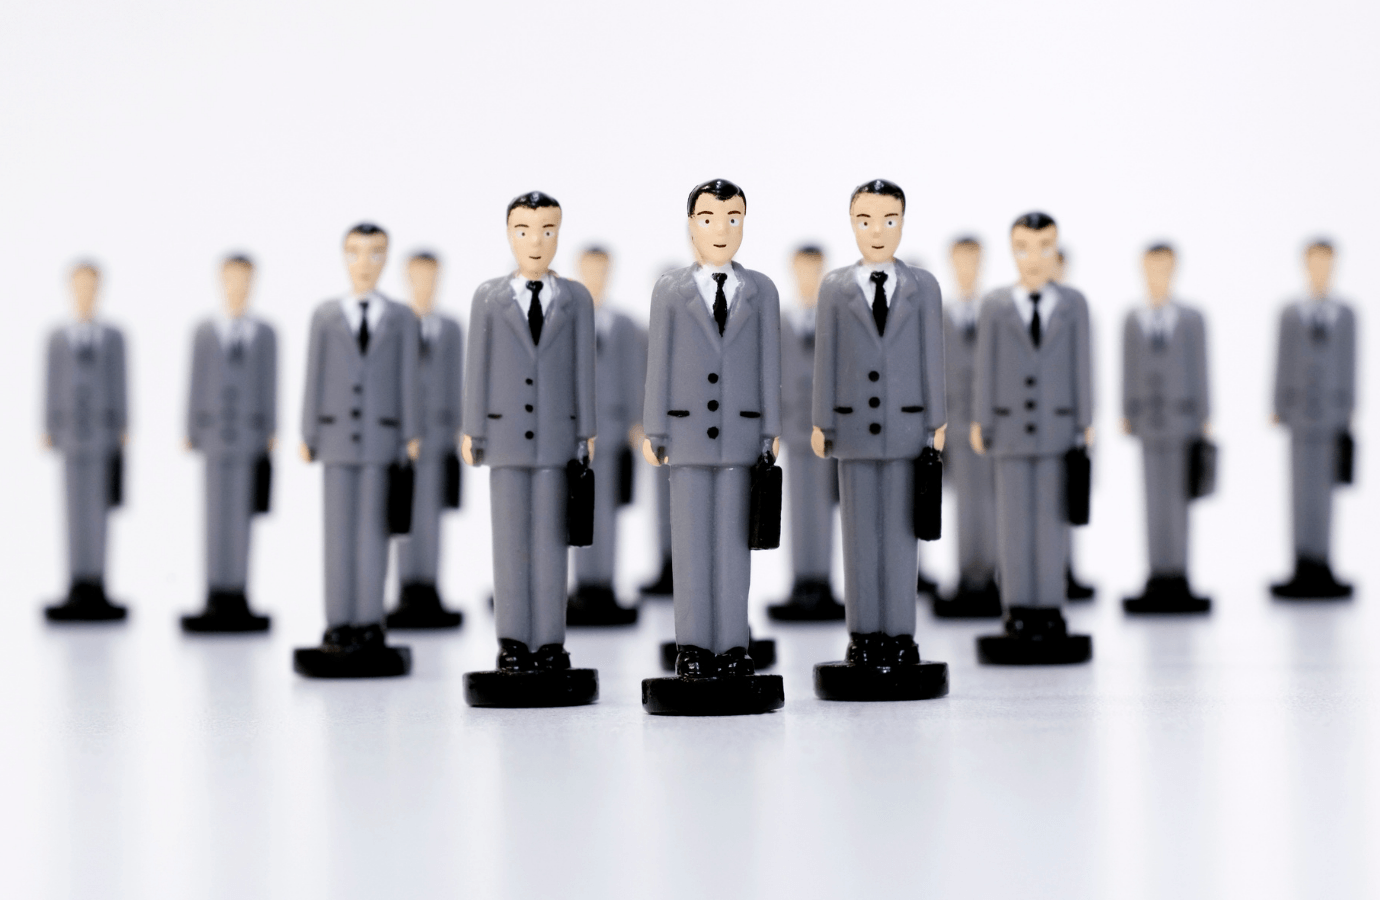 plastic army men dressed in business suits